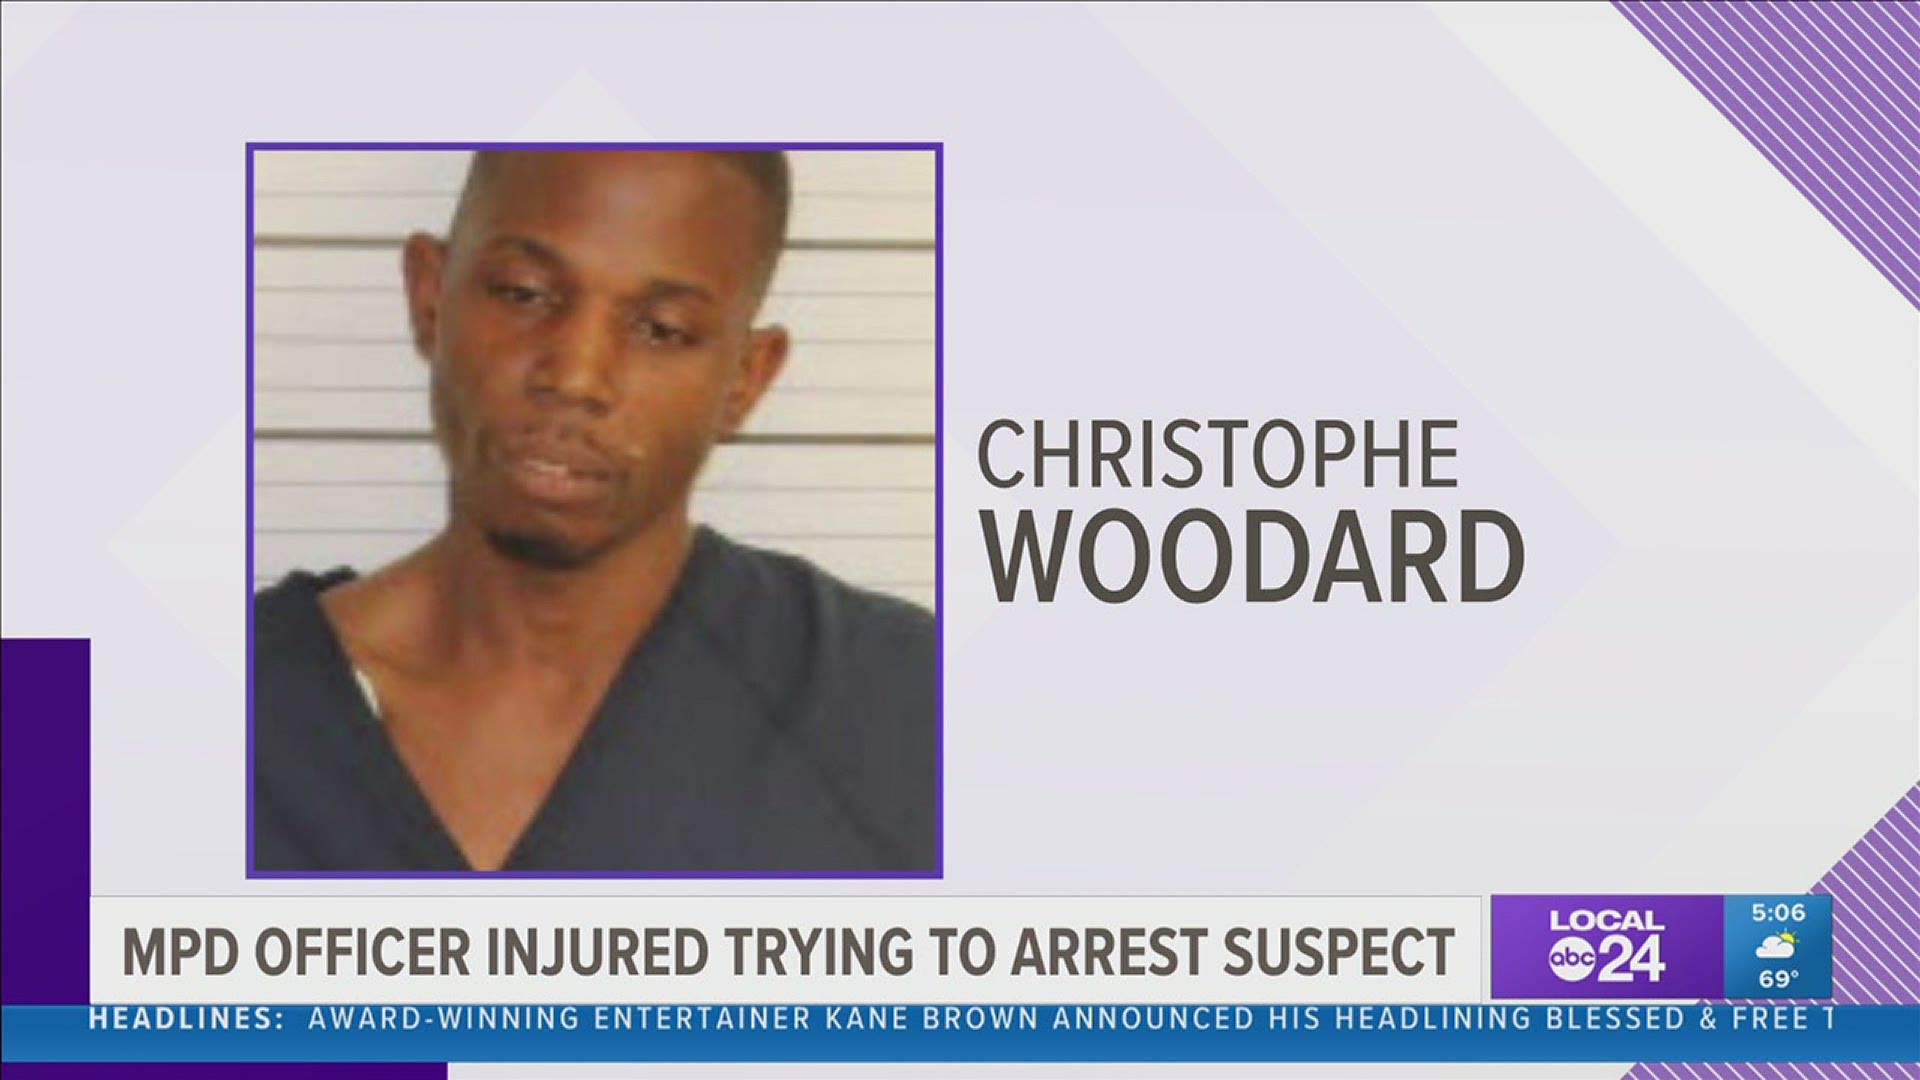 Police said Christophe Woodard was driving erratically in northeast Memphis early Thursday morning when officers responded.